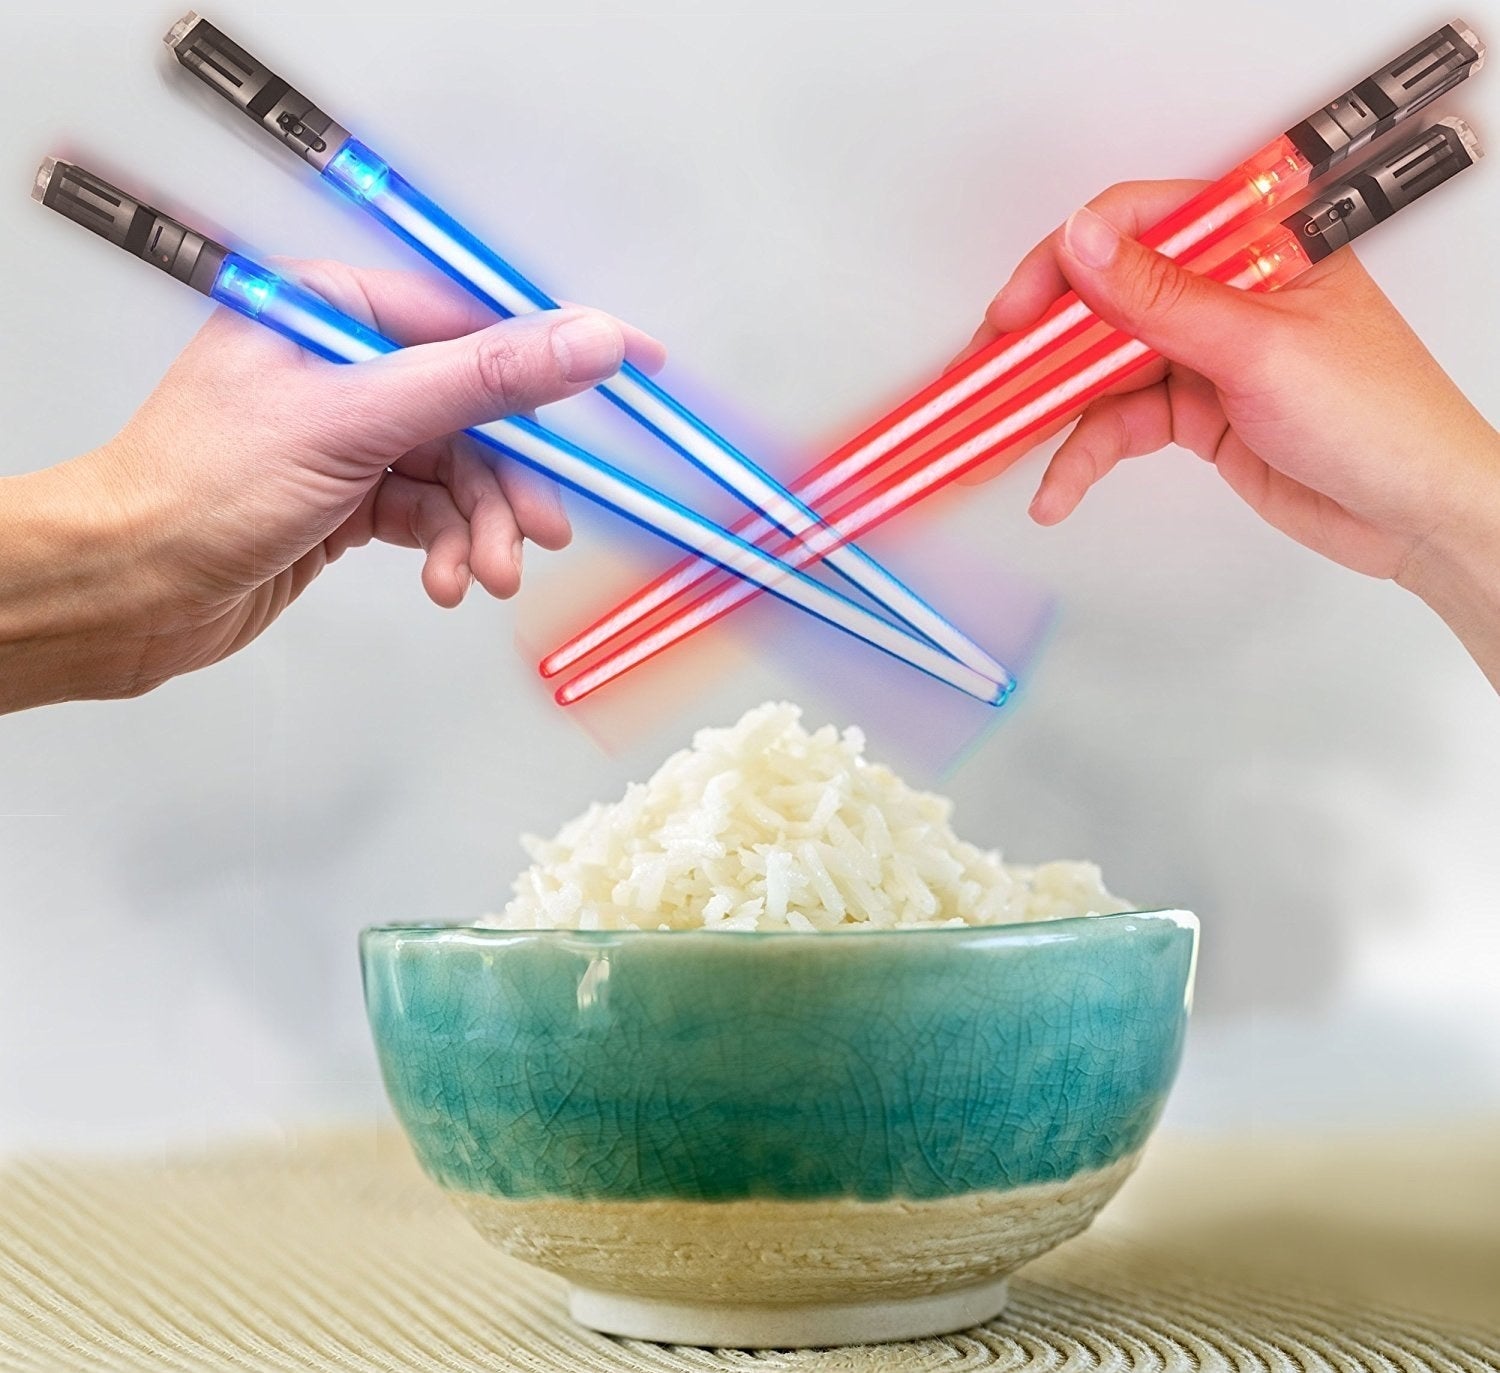 Two handles holding a pair of blue and red chopsticks that look like lightsabers over a bowl of rice 